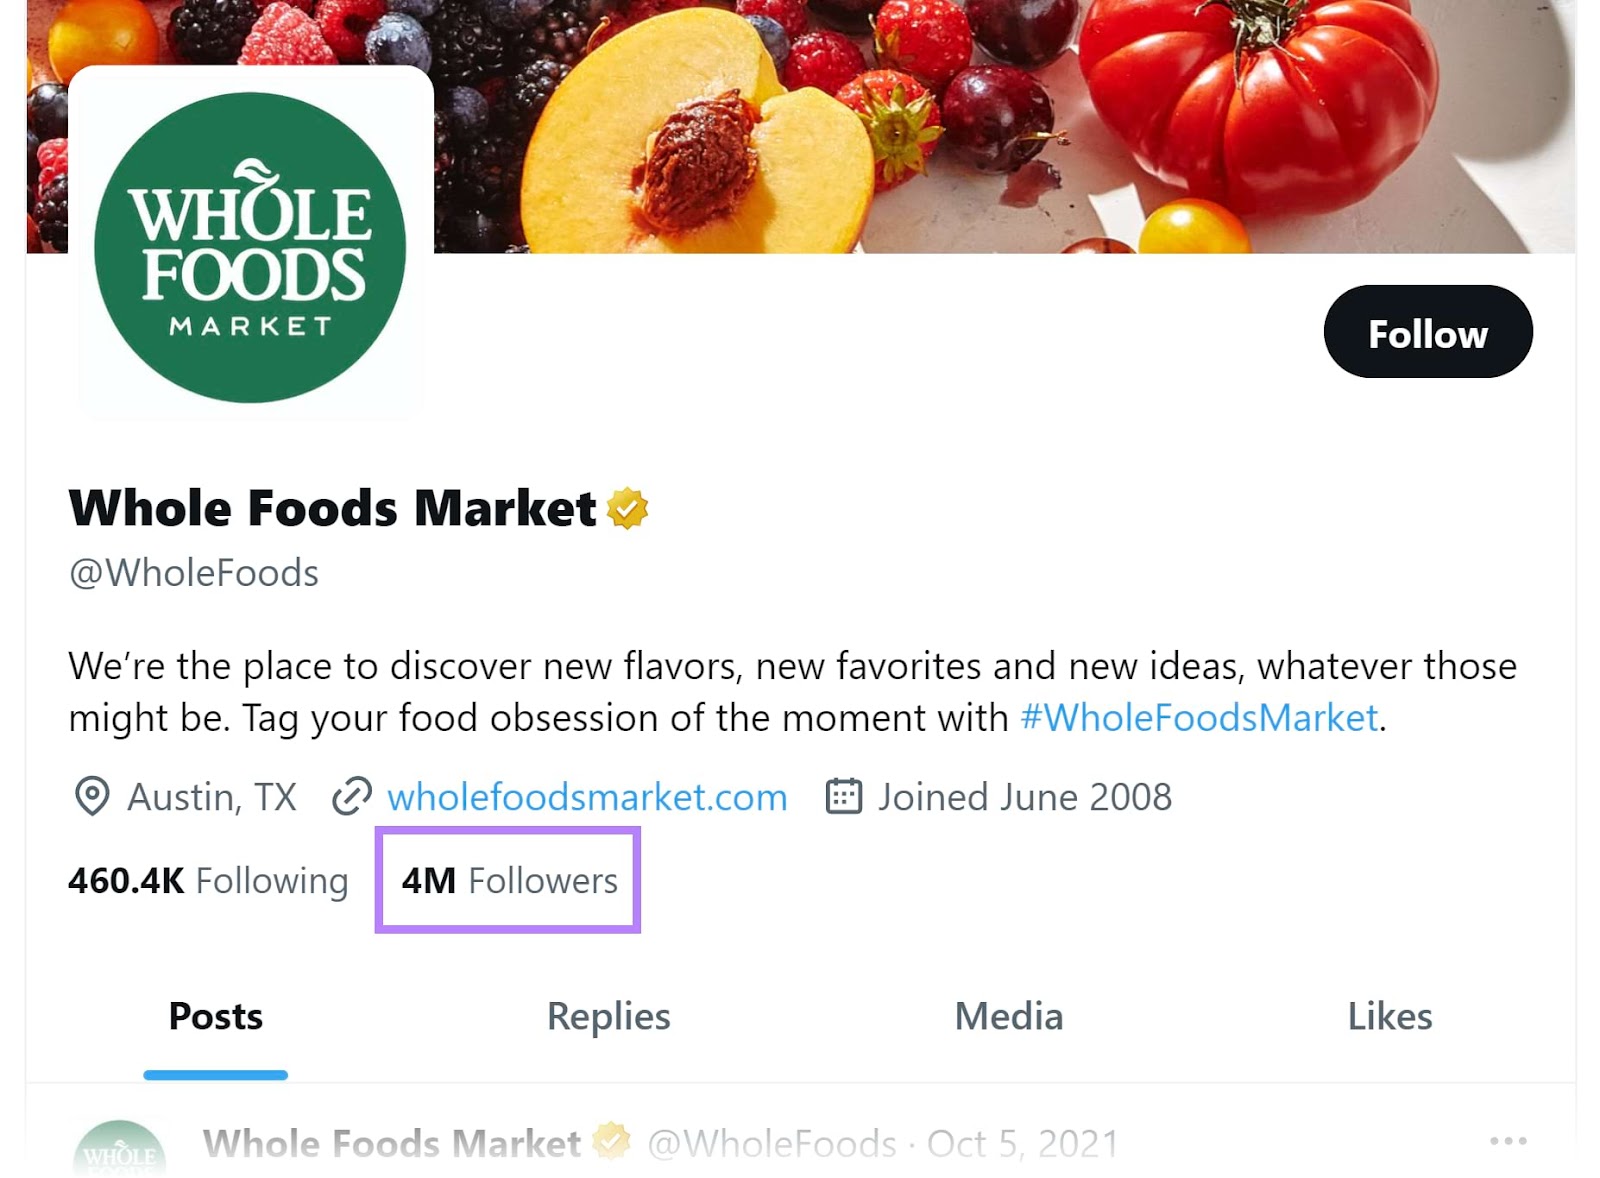 Whole Foods Market has 4M followers connected  X (formerly Twitter)